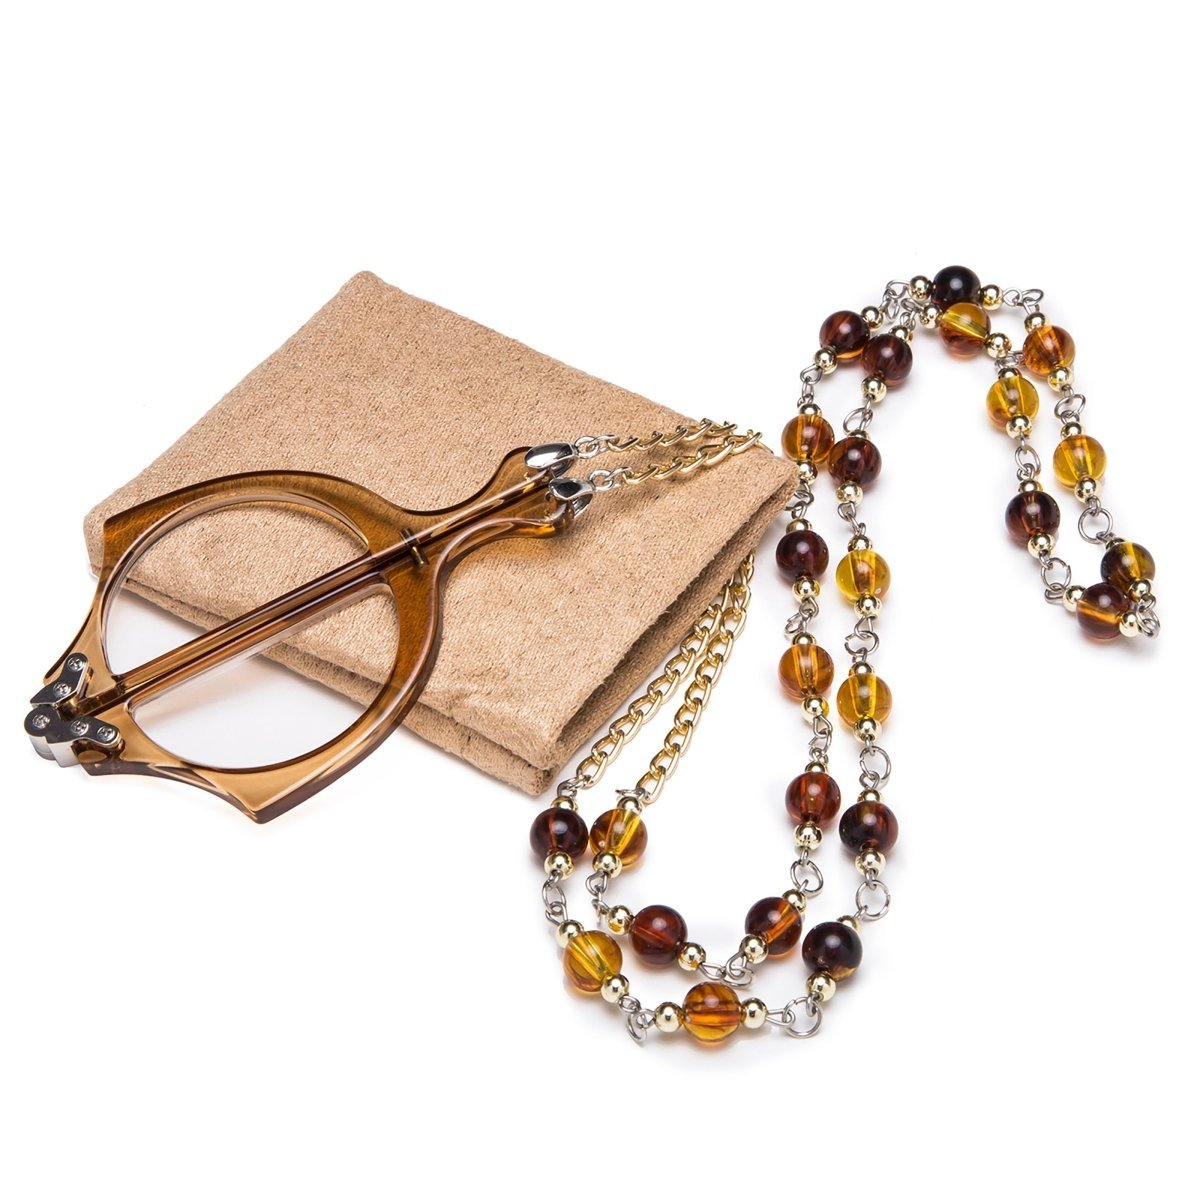 Folding Reading Glasses with Chain for Women R153eyekeeper.com